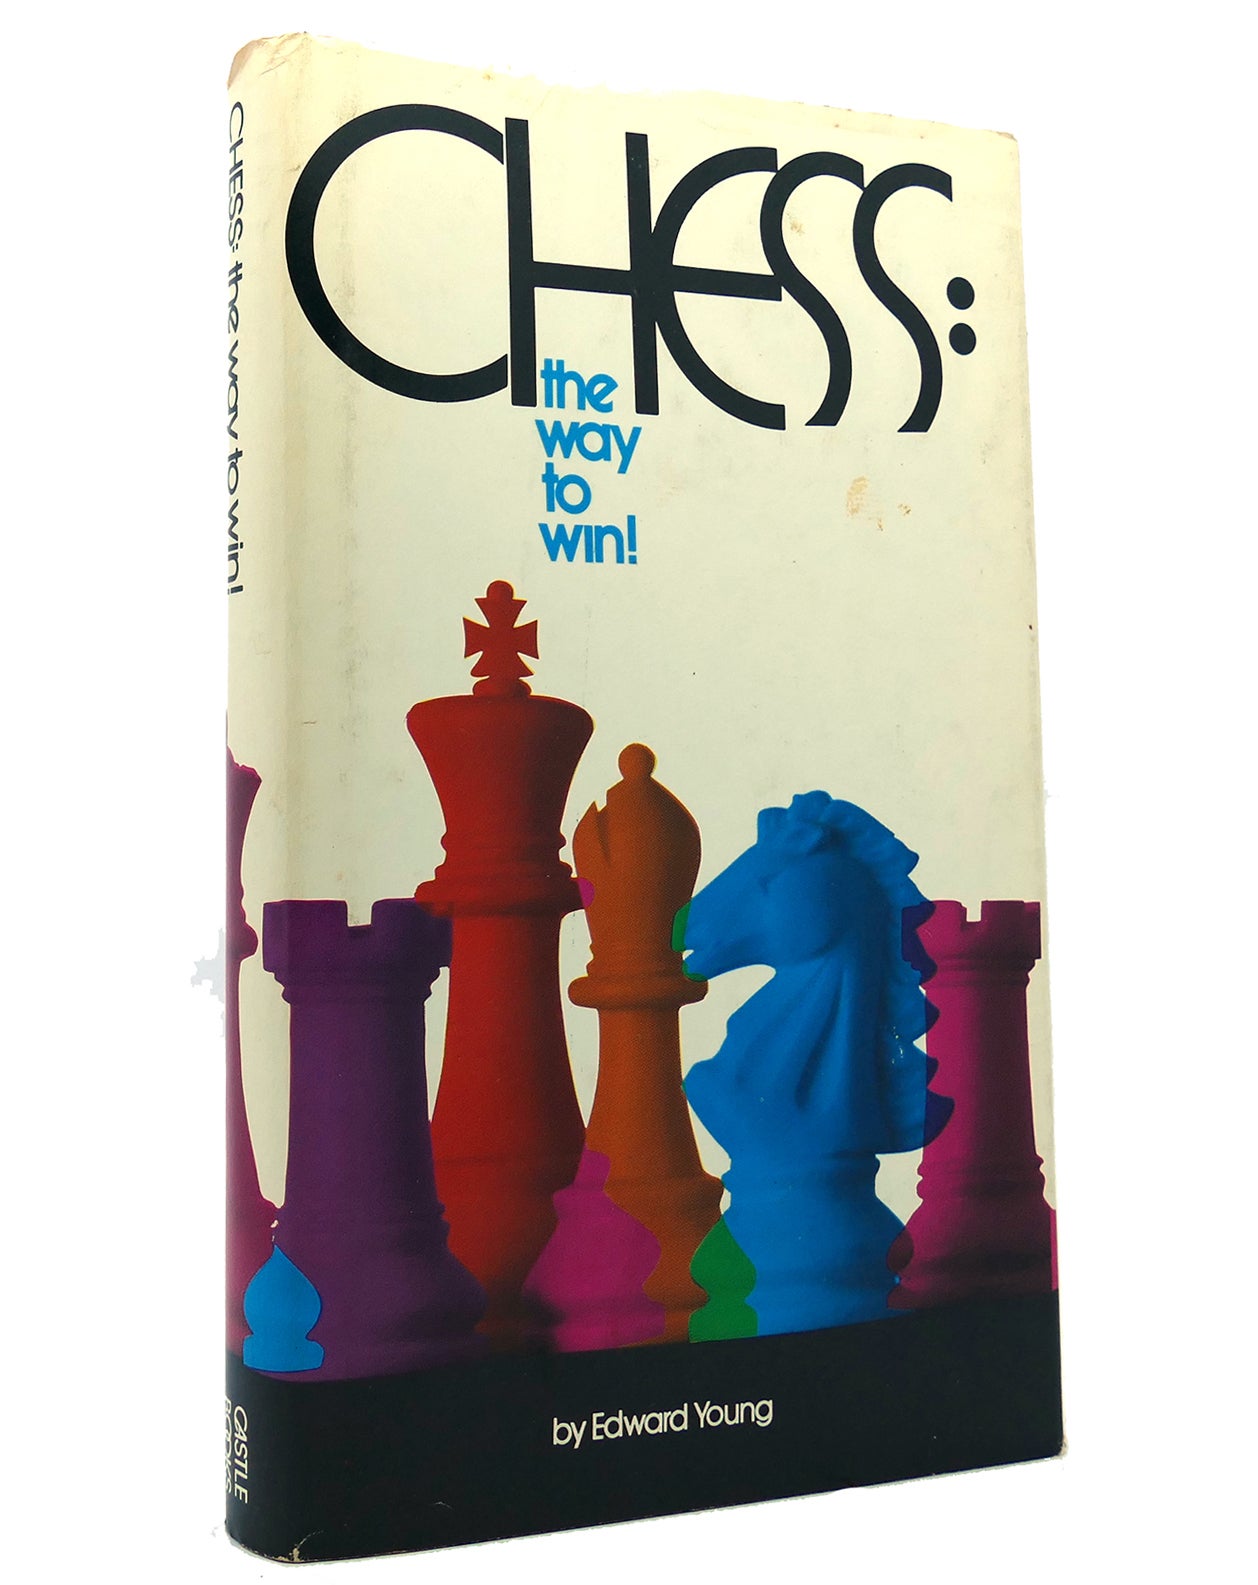 CHESS: THE WAY TO WIN!, Edward Young